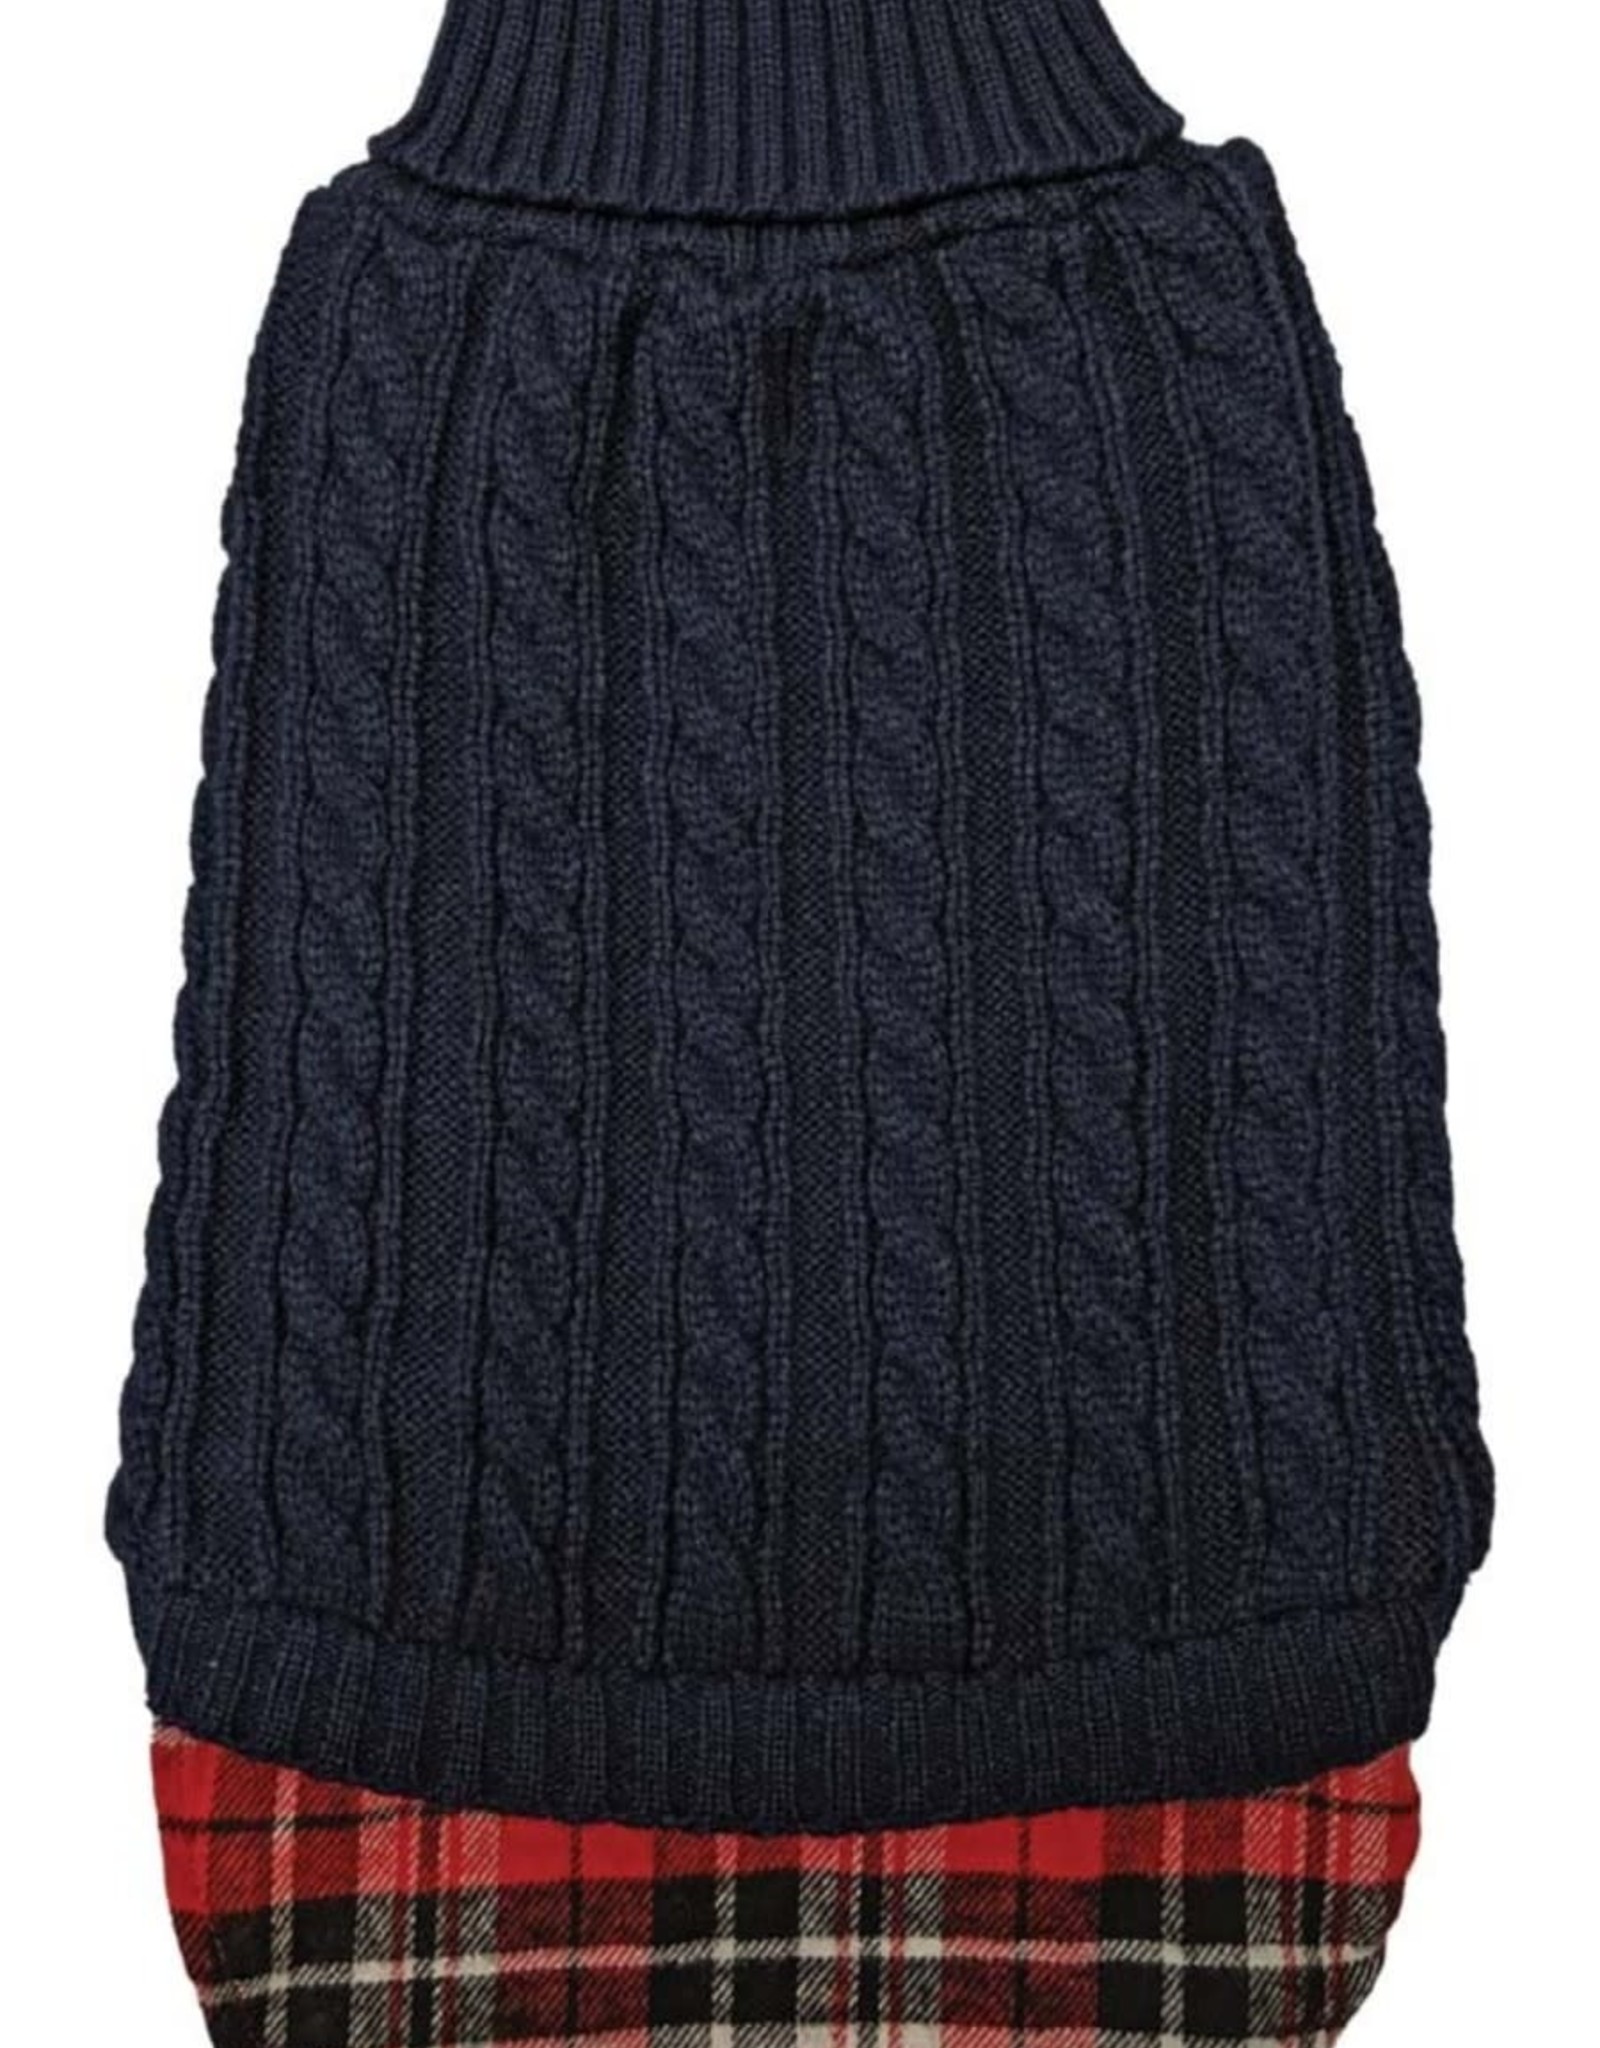 FASHION PET (ETHICAL) FAS Un-Tucked Cable Dog Sweater Navy XX-Large